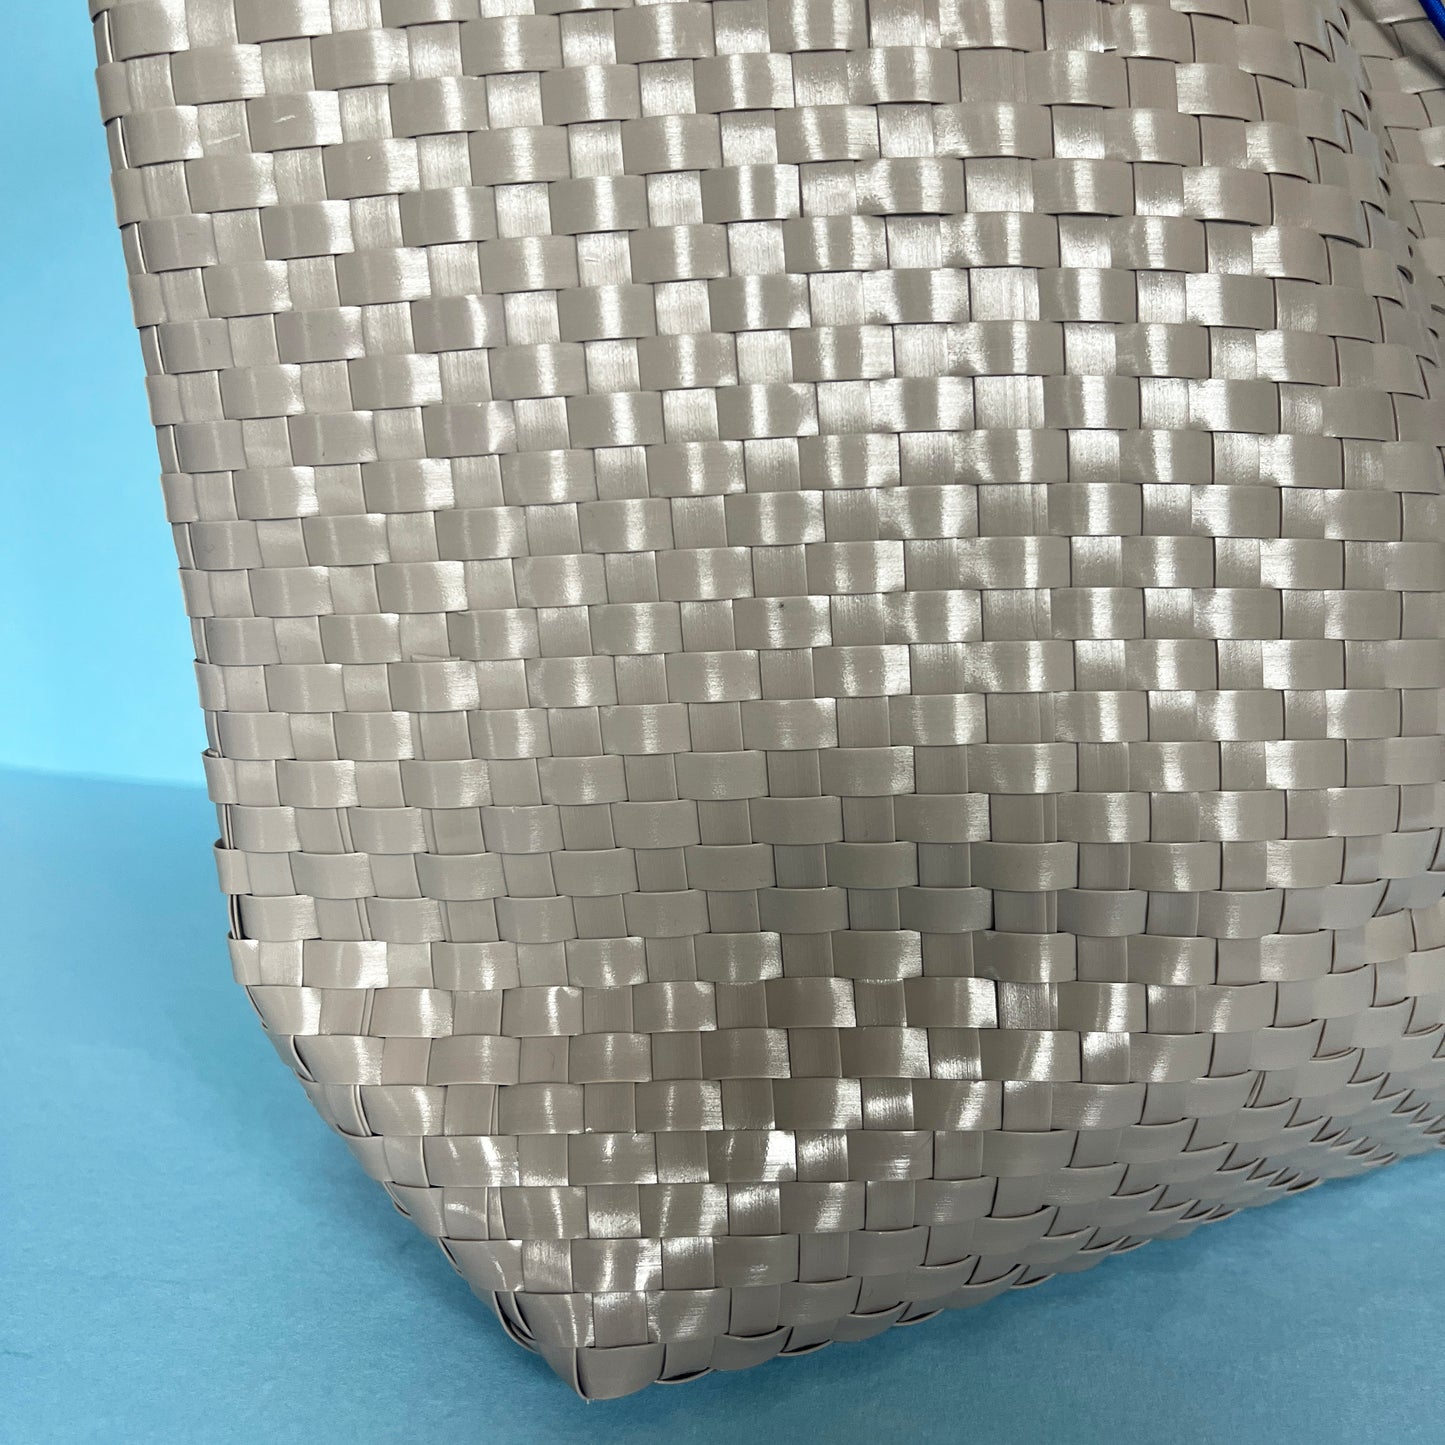 Bicycle Pannier recycled gray plastic woven basket tote bag with toggle closure